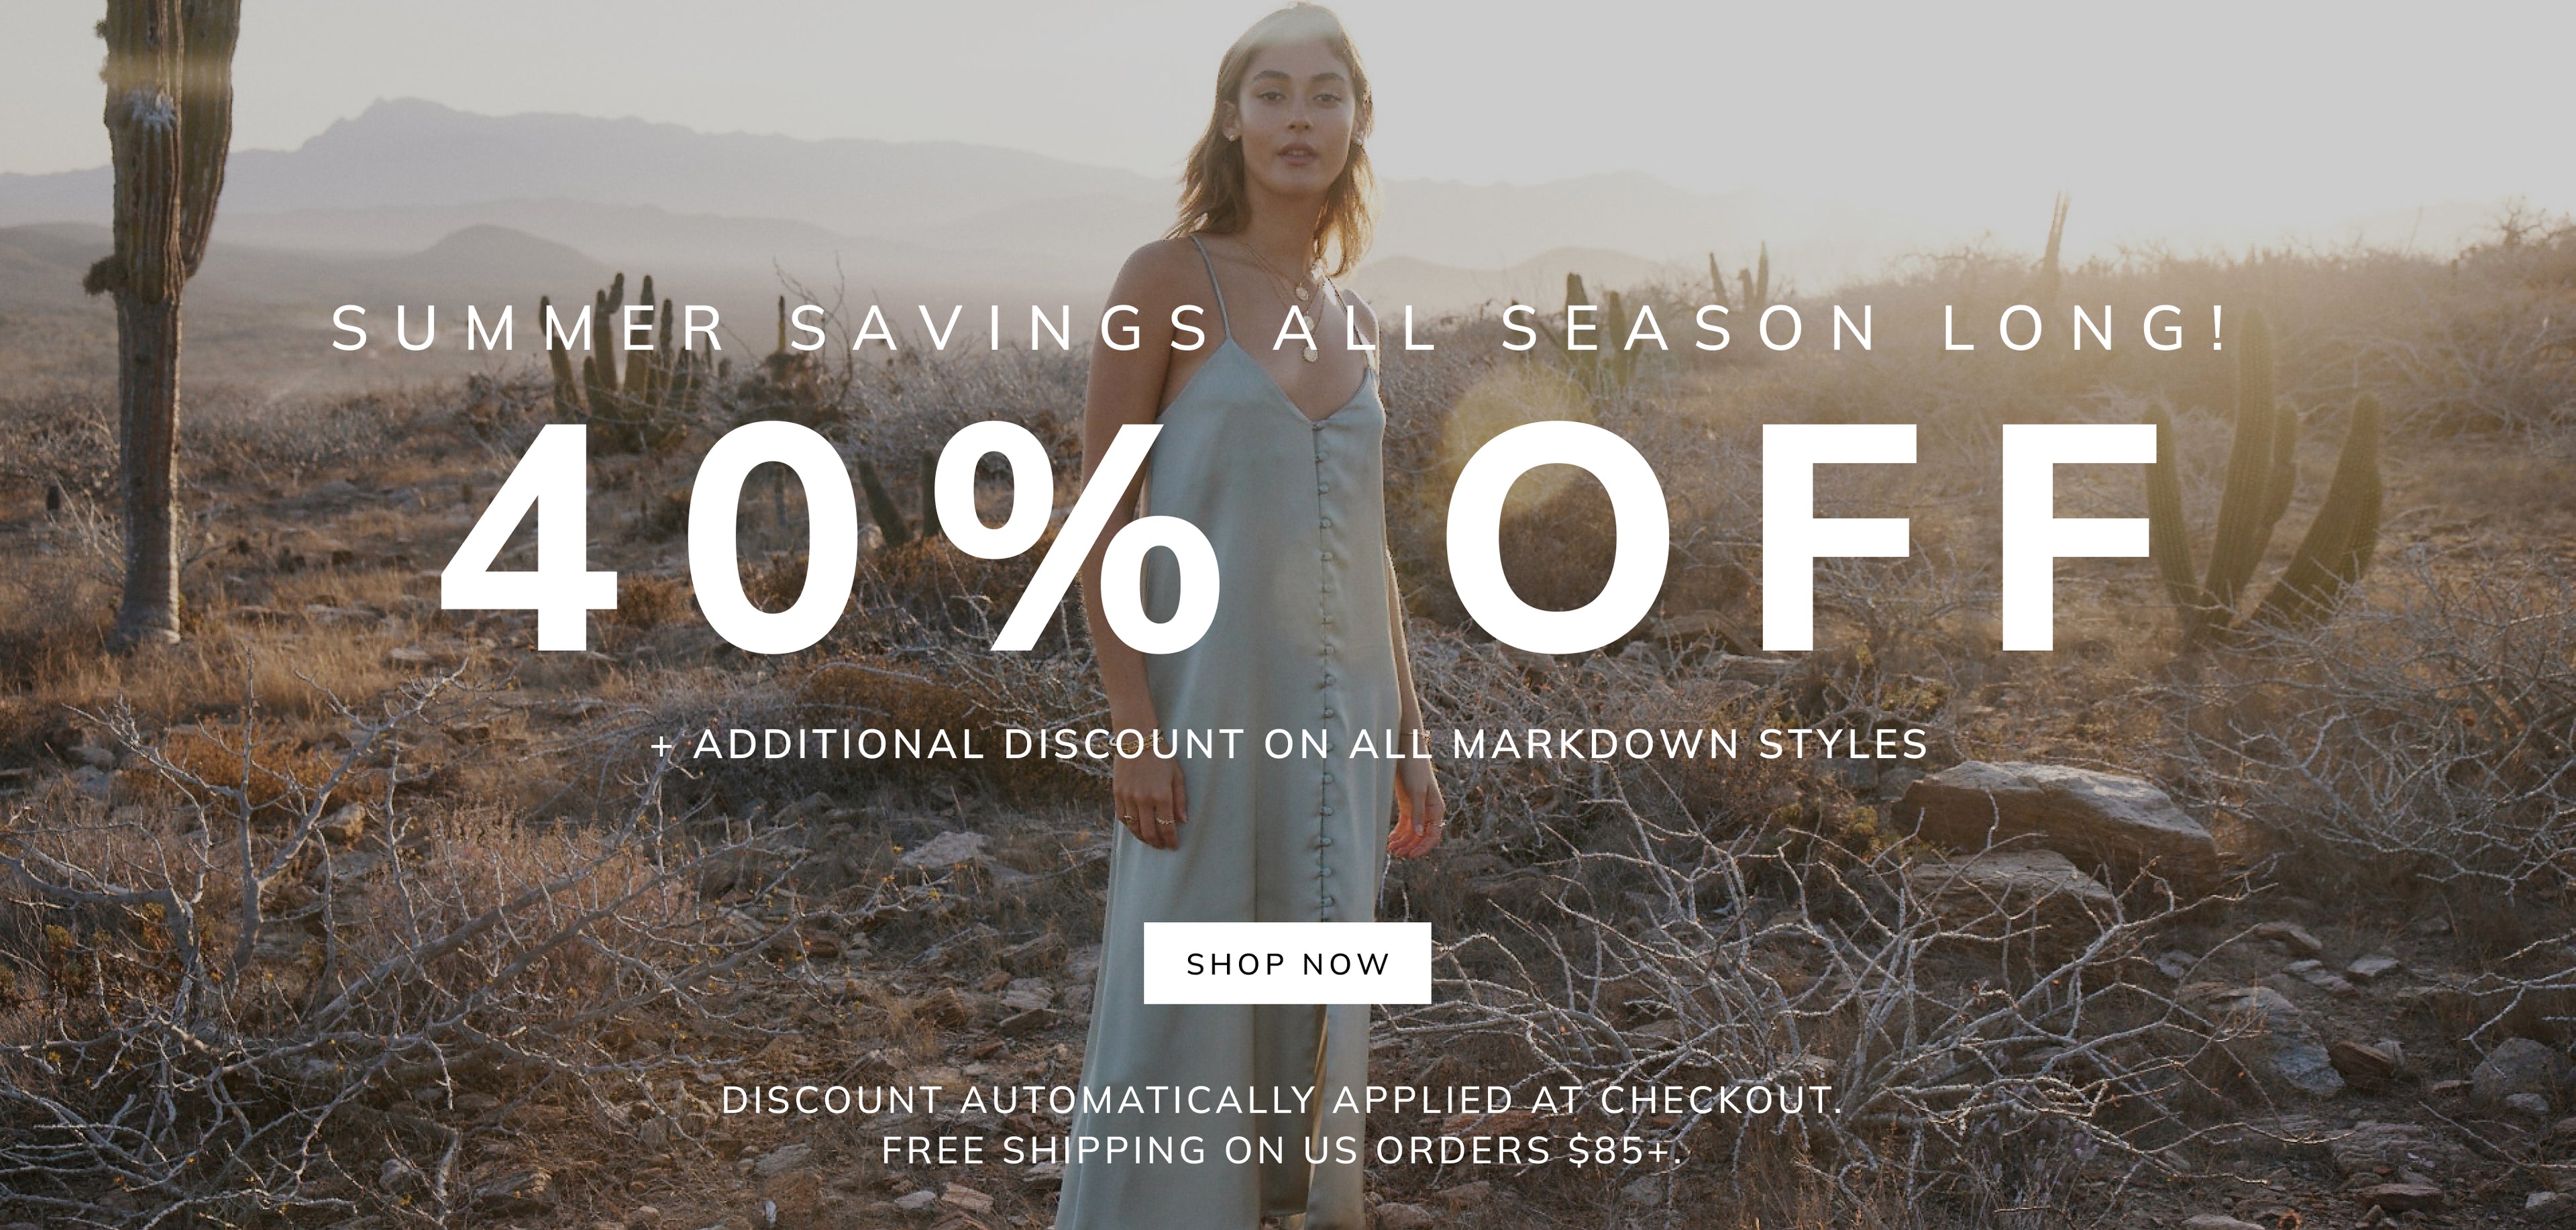 SUMMER SAVINGS ALL SEASON -LONG! 40% OFF + ADDITIONAL DISCOUNT ON ALL MARKDOWN STYLES SHOP NOW DISCOUNT AUTOMATICALLY APPLIED AT CHECKOUT. FREE SHIPPING ON US ORDERS $85+